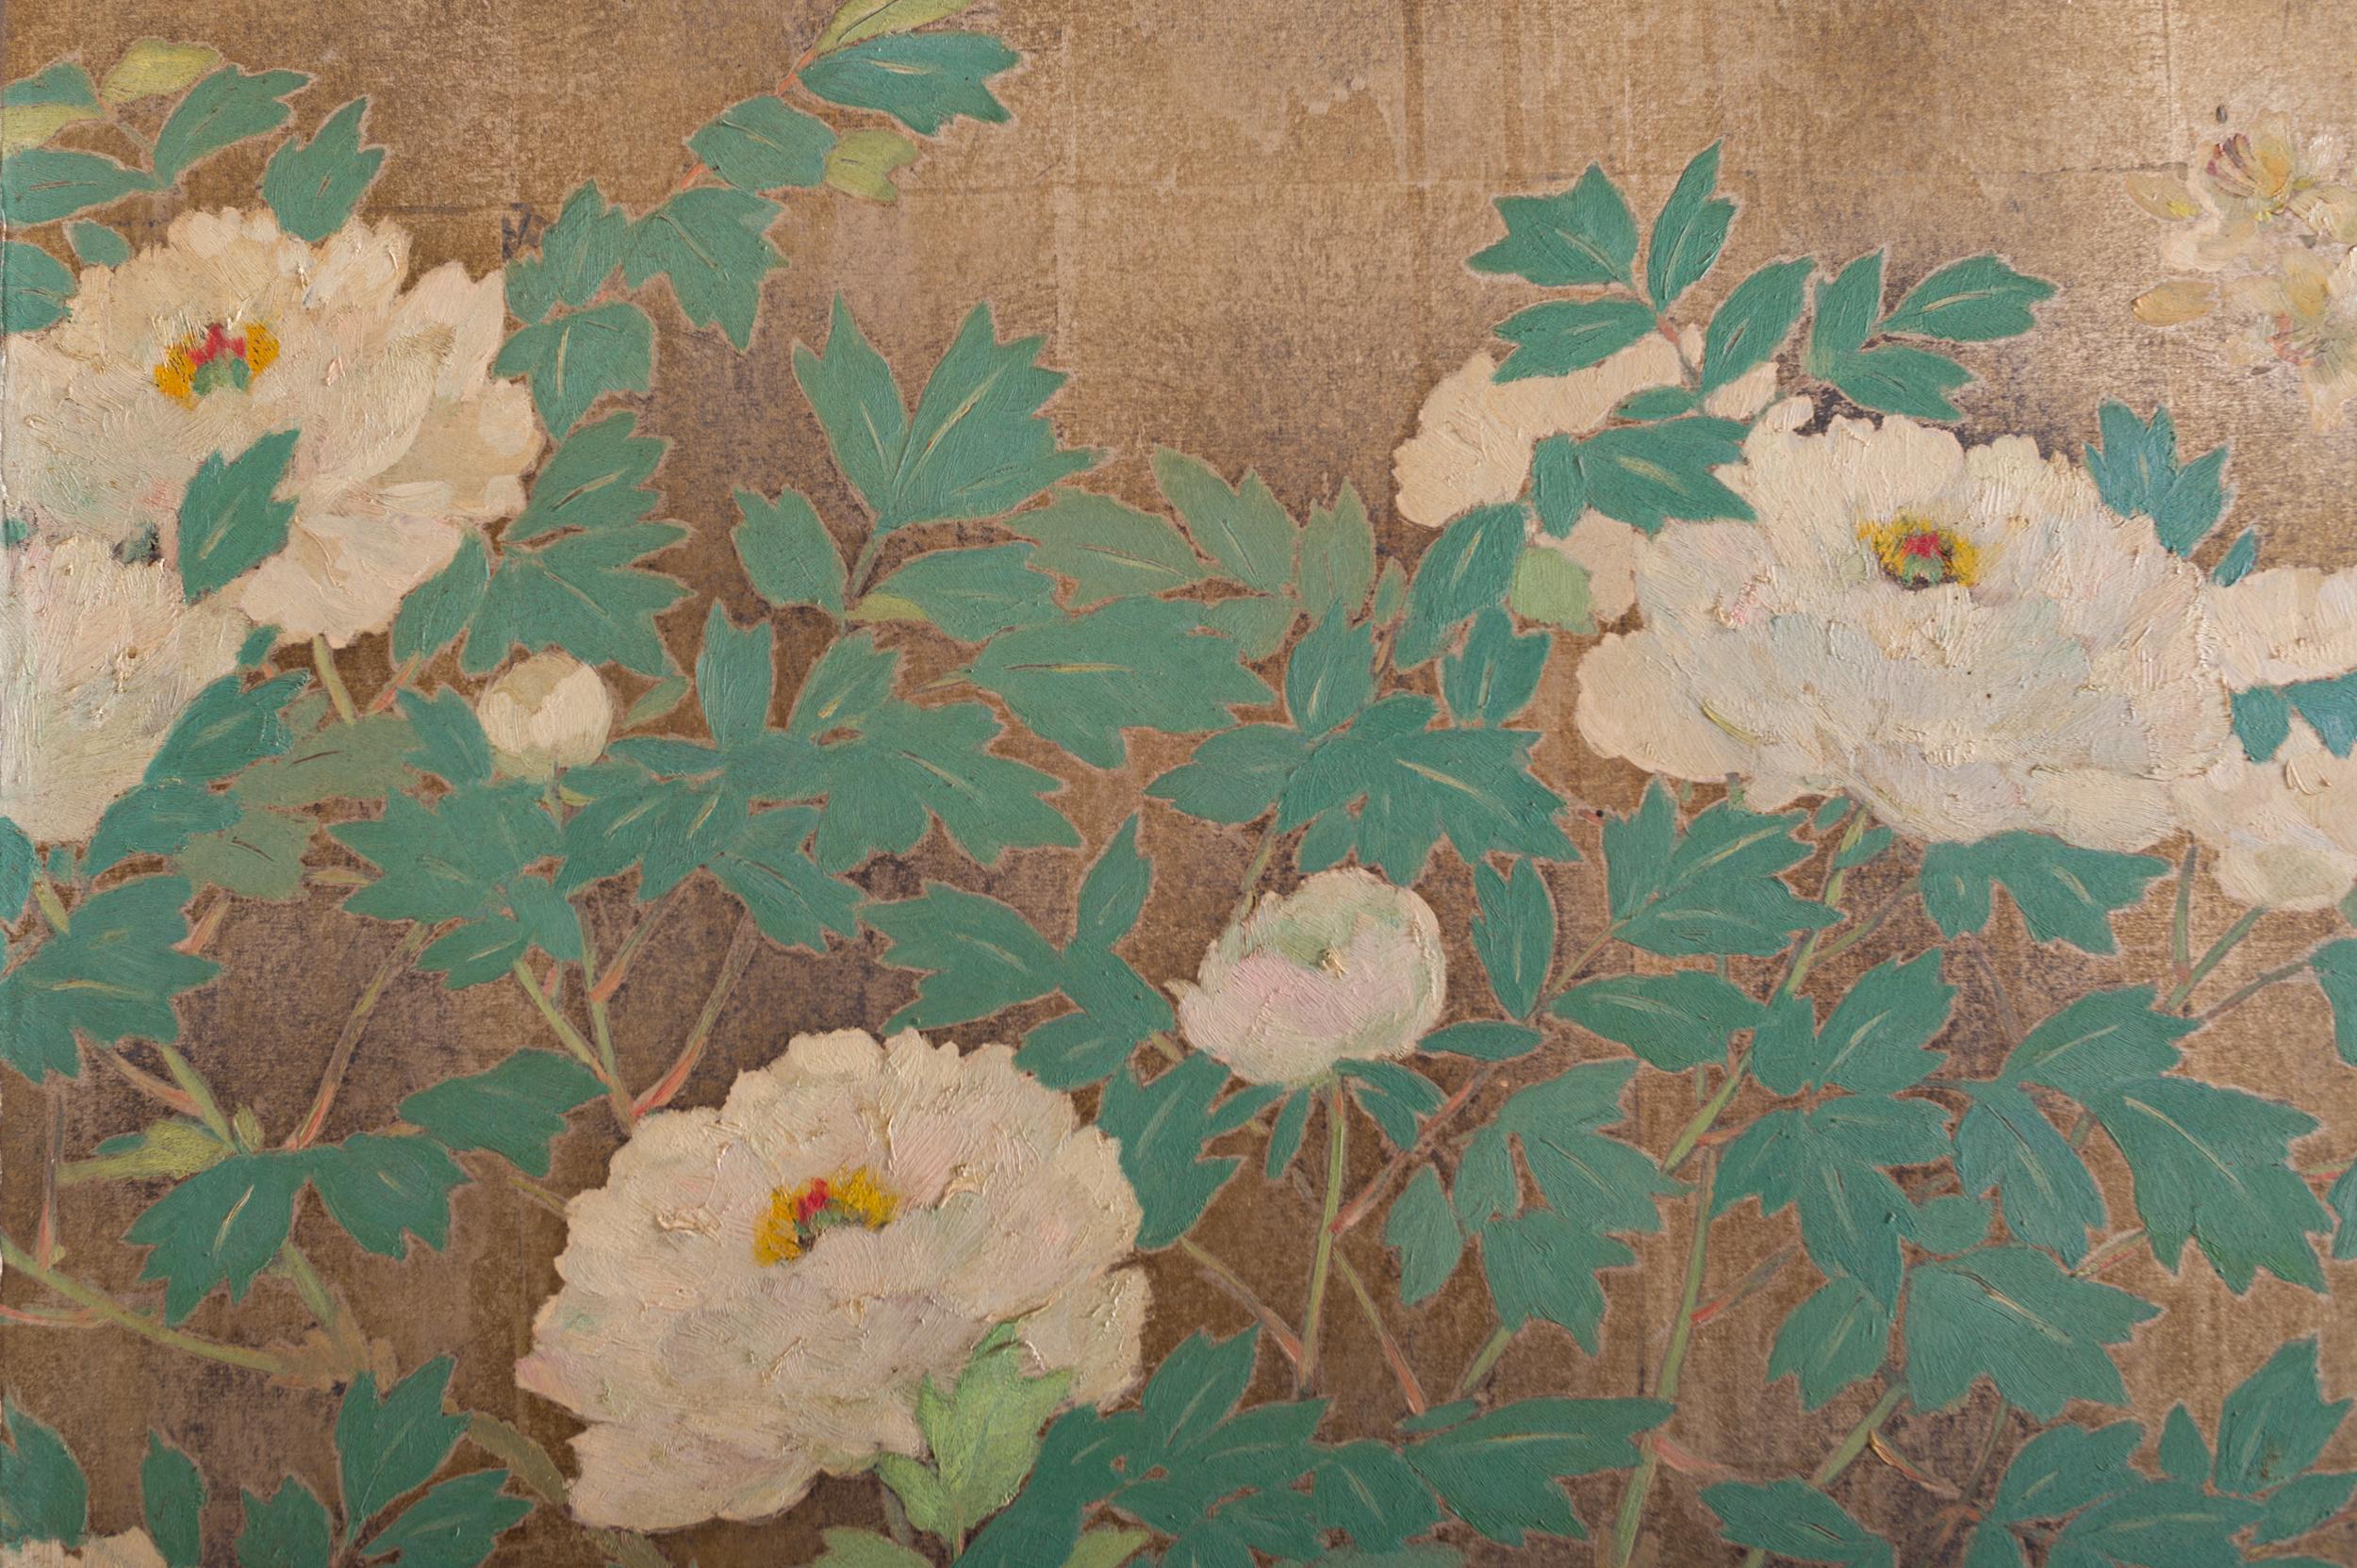 Japanese two-panel screen: Peony, Wisteria, cherry and bamboo on soft silver, Meiji period (1868-1912) painting of a garden in spring. Painted in mineral pigments on oxidized silver leaf. Screen has beautiful fabric backing. Condition is good with